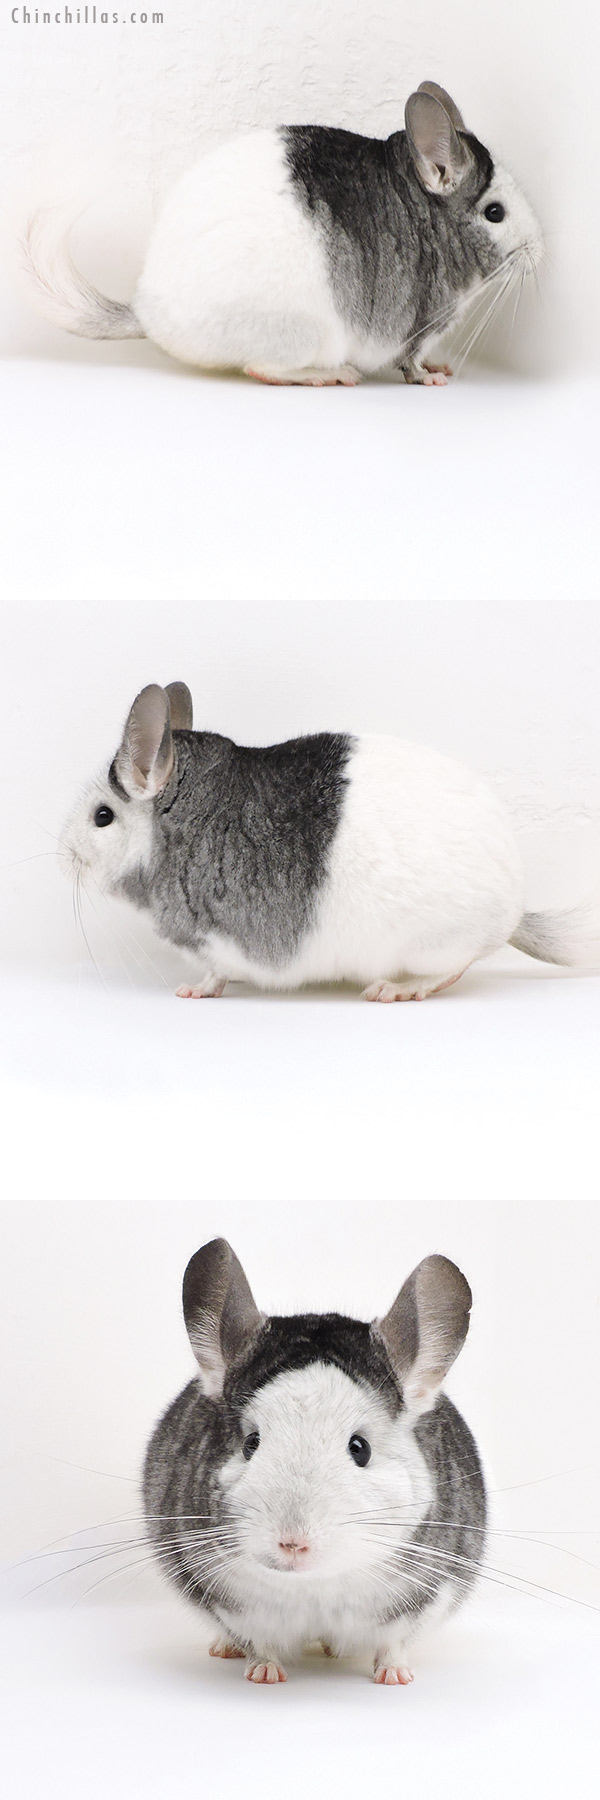 Chinchilla or related item offered for sale or export on Chinchillas.com - 18025 Show Quality Extreme White Mosaic Female Chinchilla